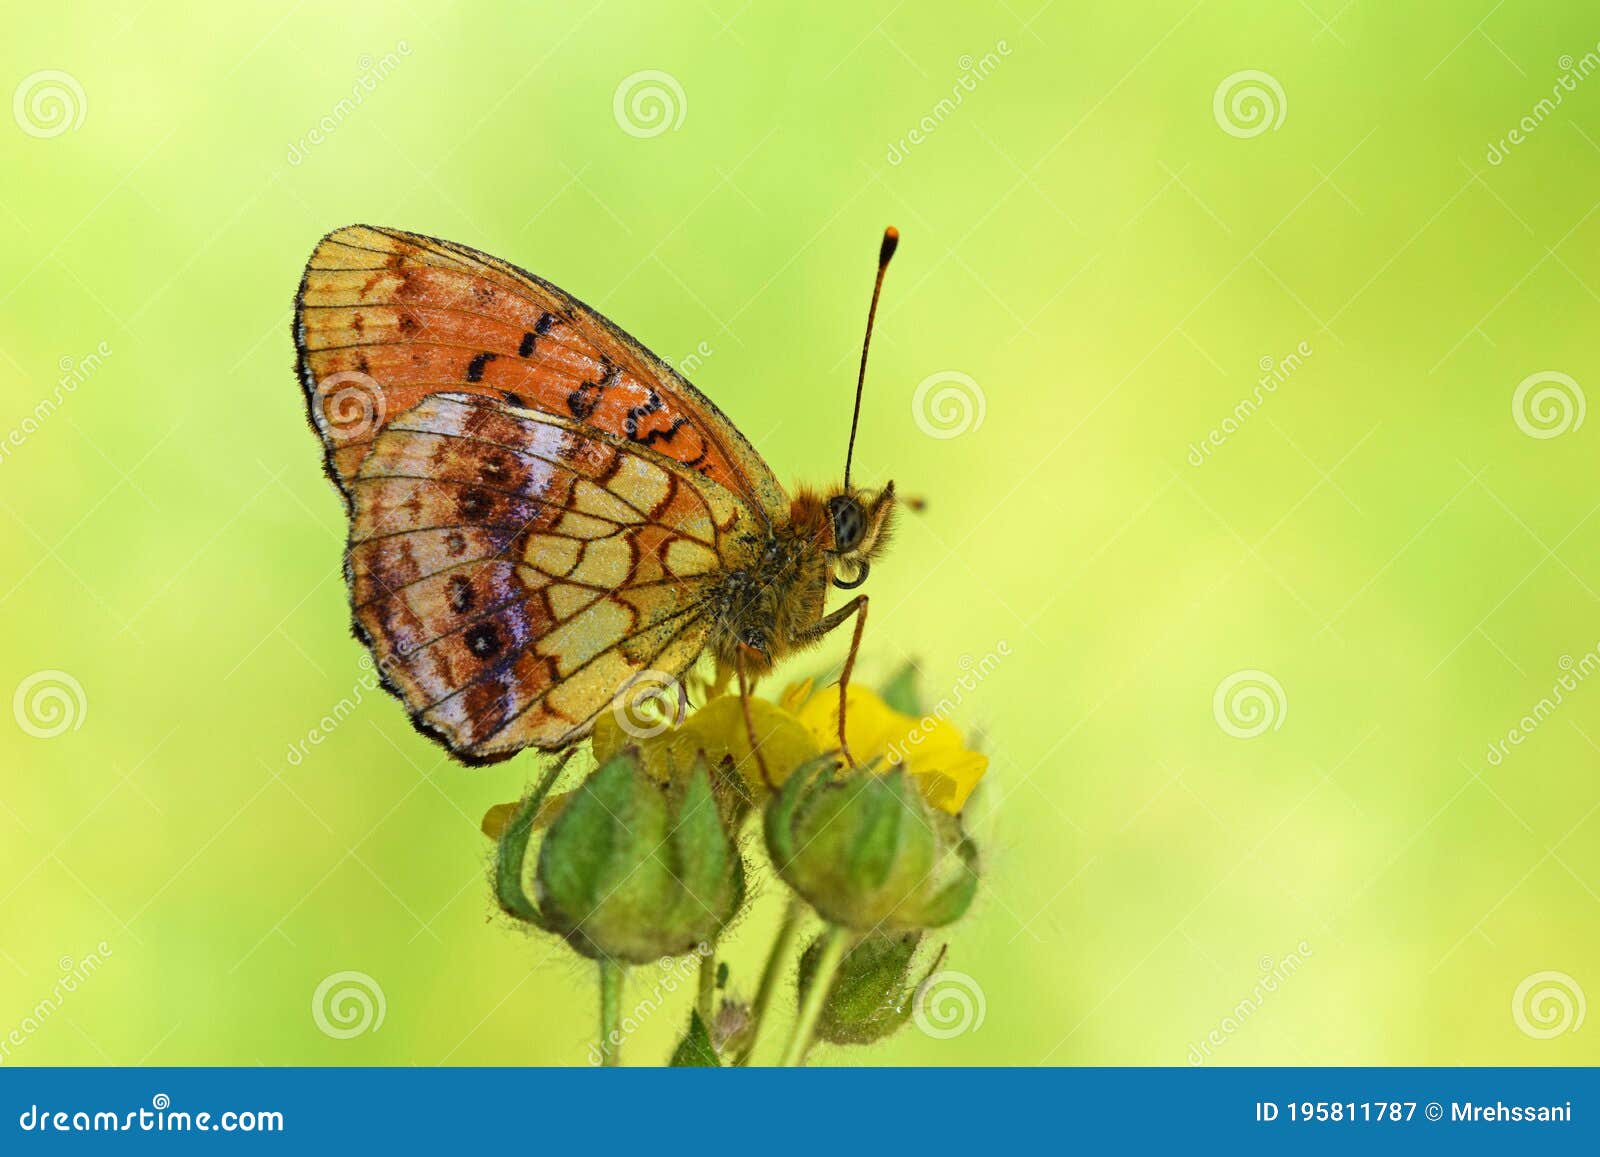 brenthis ino , the lesser marbled fritillary butterfly , butterflies of iran